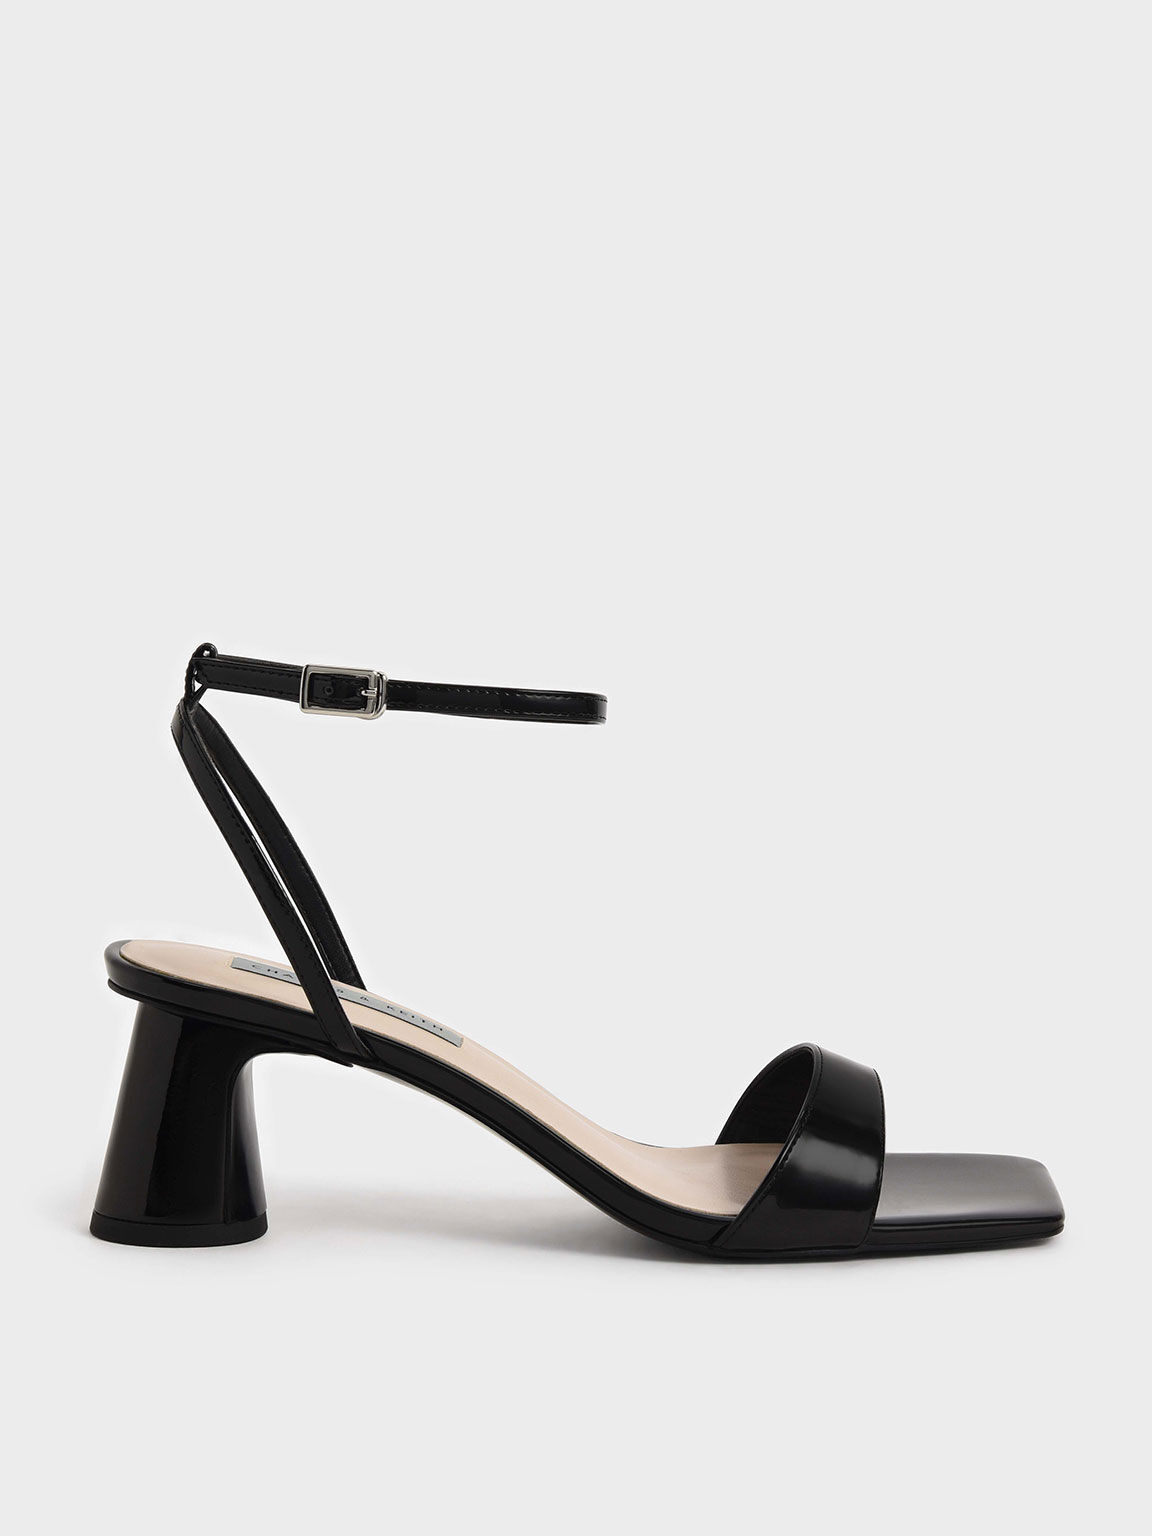 Black Patent Ankle-Strap Cylindrical Heel Sandals - CHARLES & KEITH GR